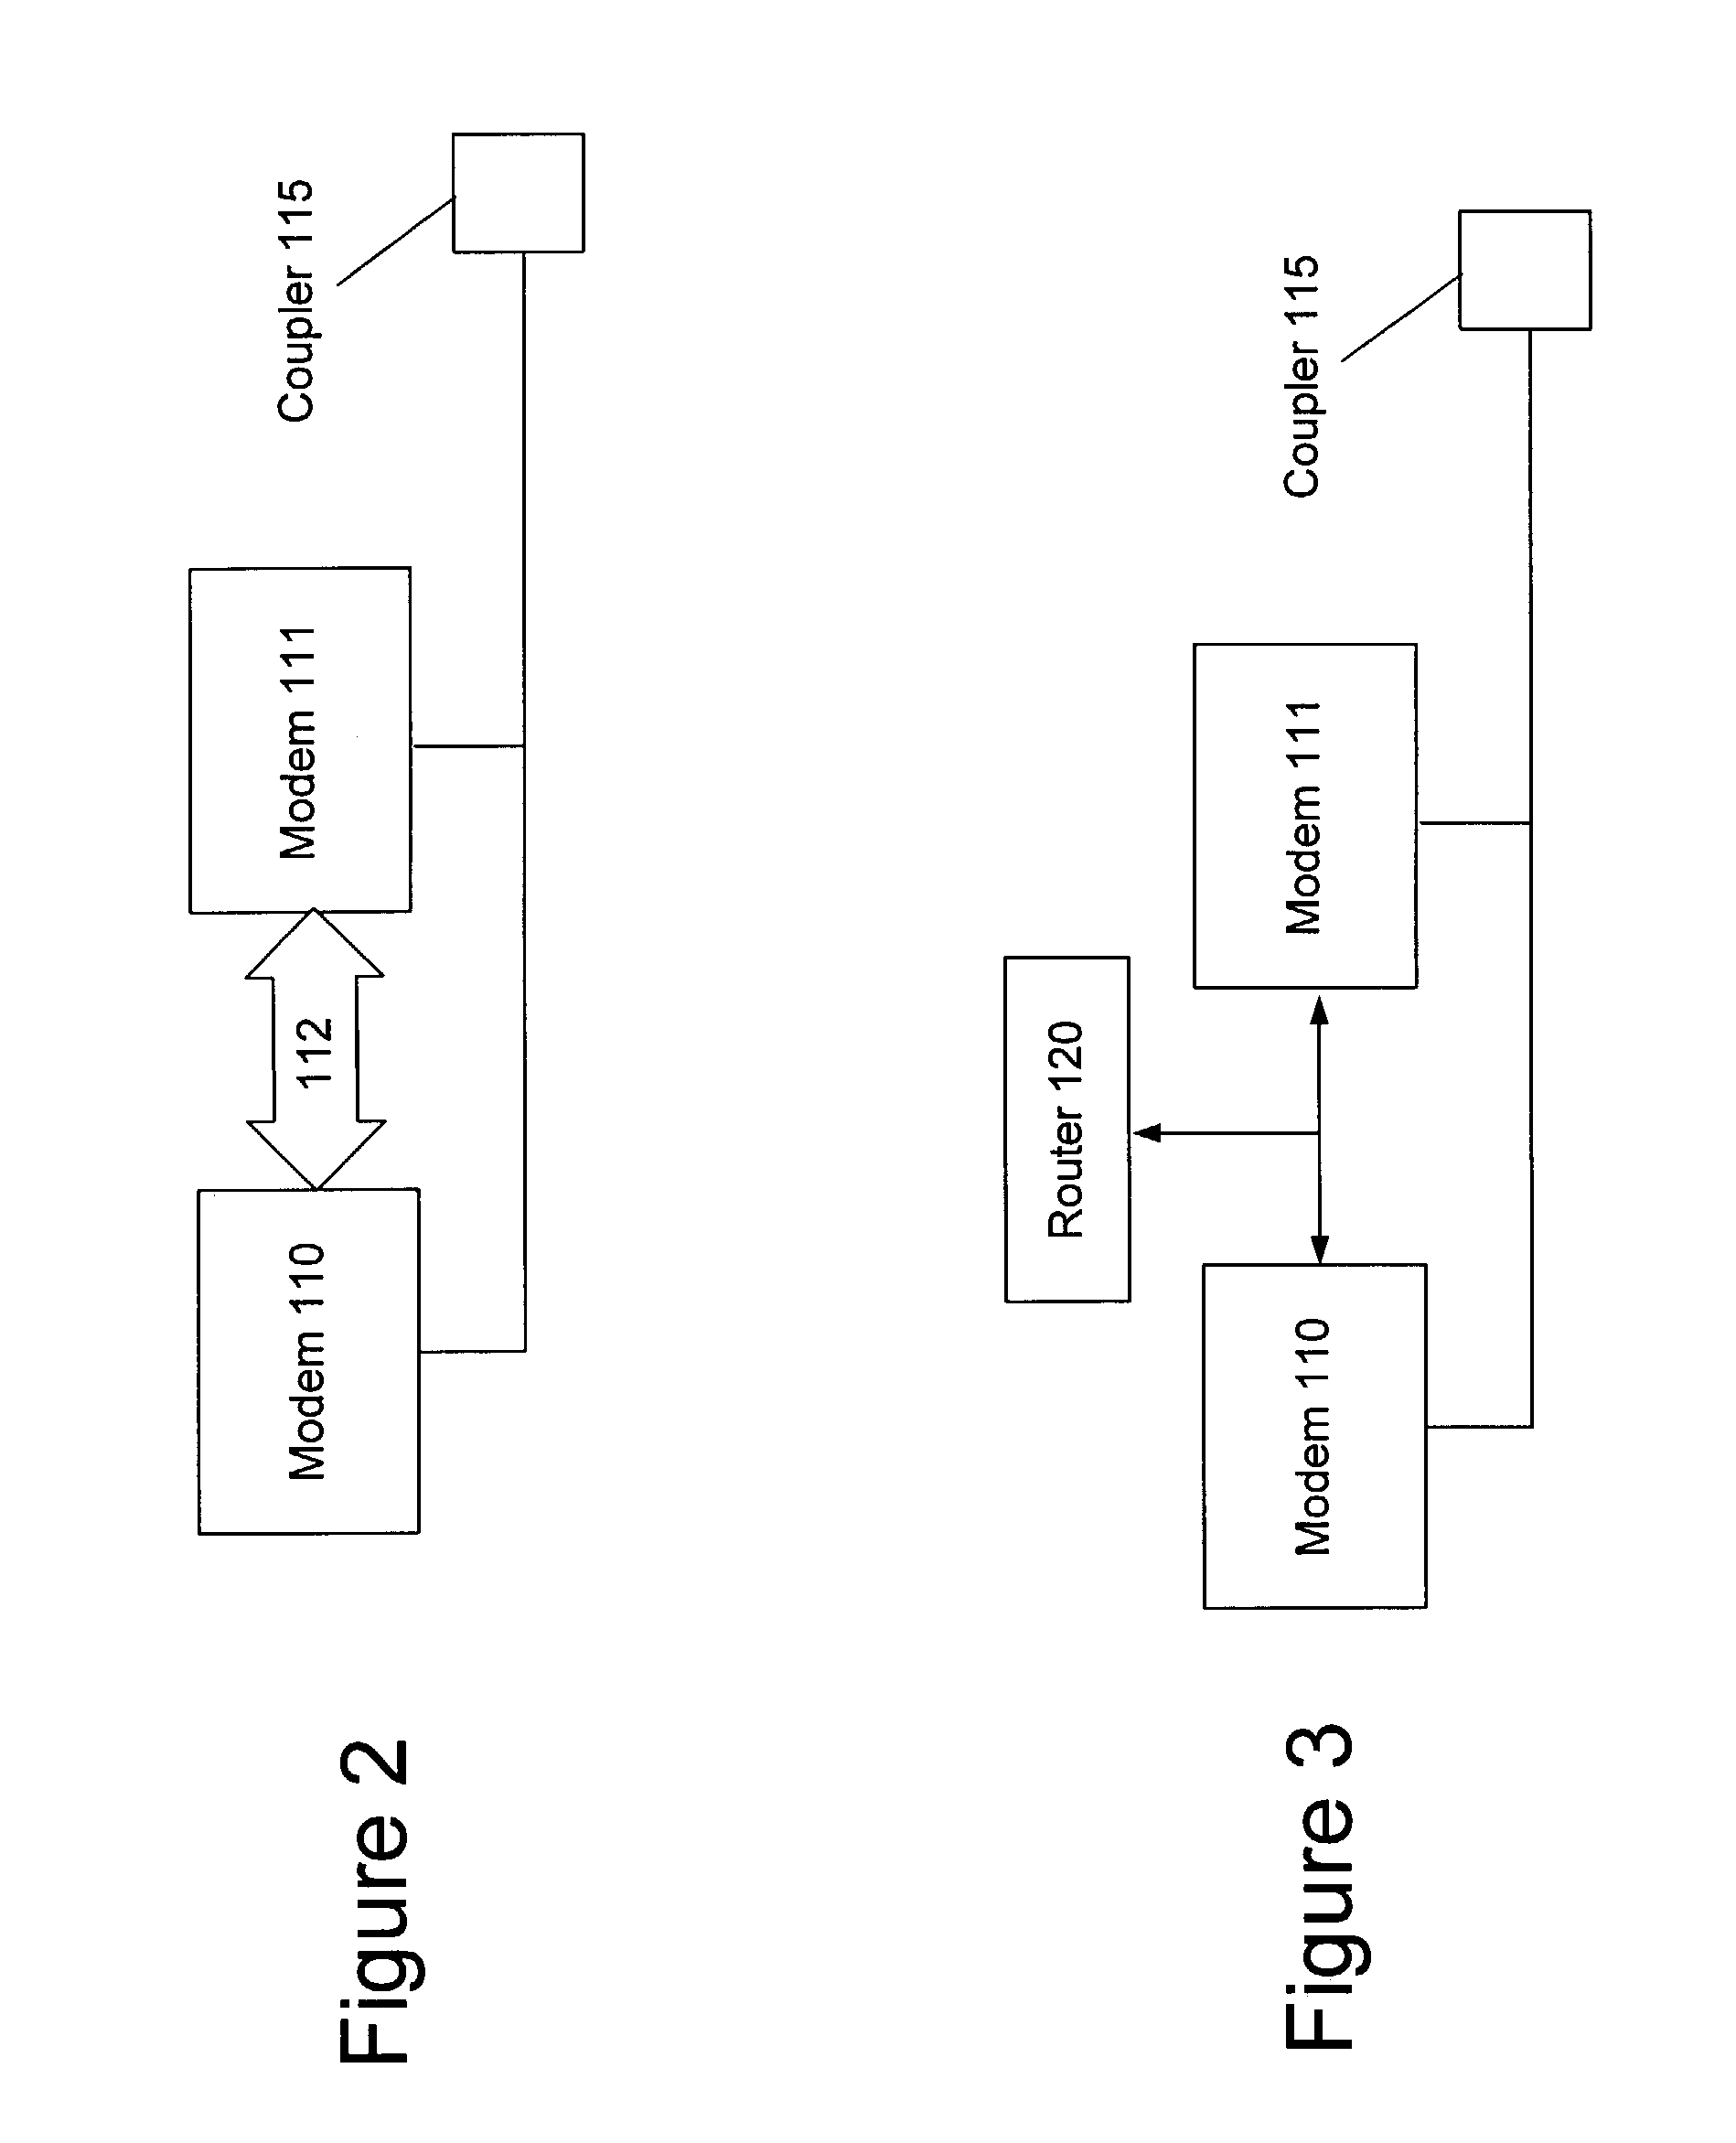 Power line communication device and method of using the same